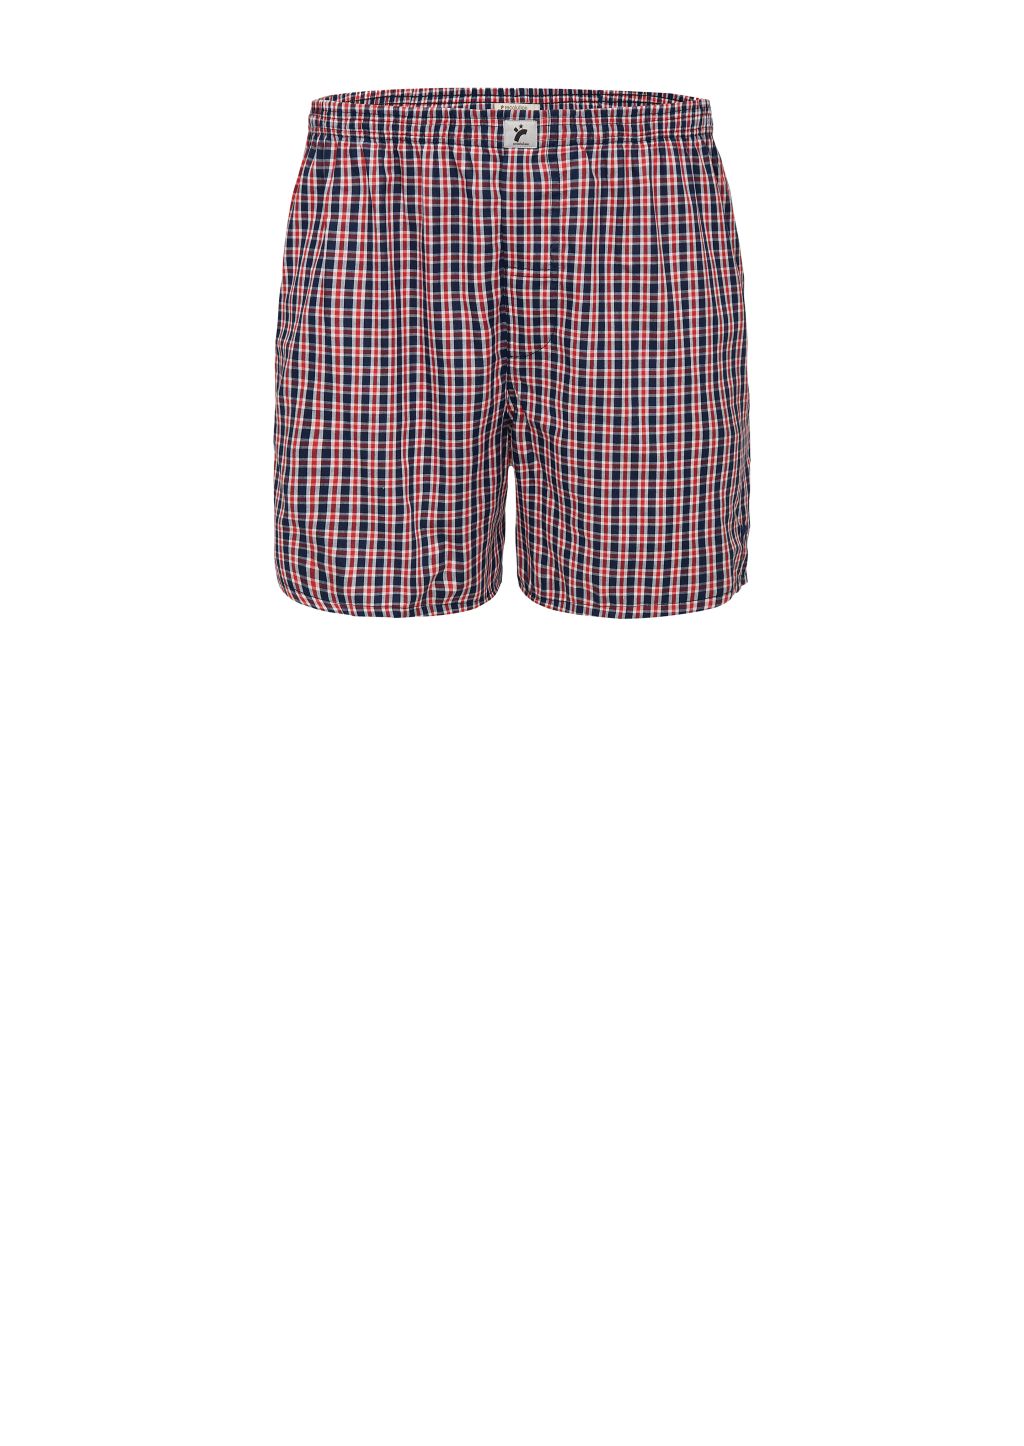 Männer Boxershorts #Checked Blue/White/Red Checked S